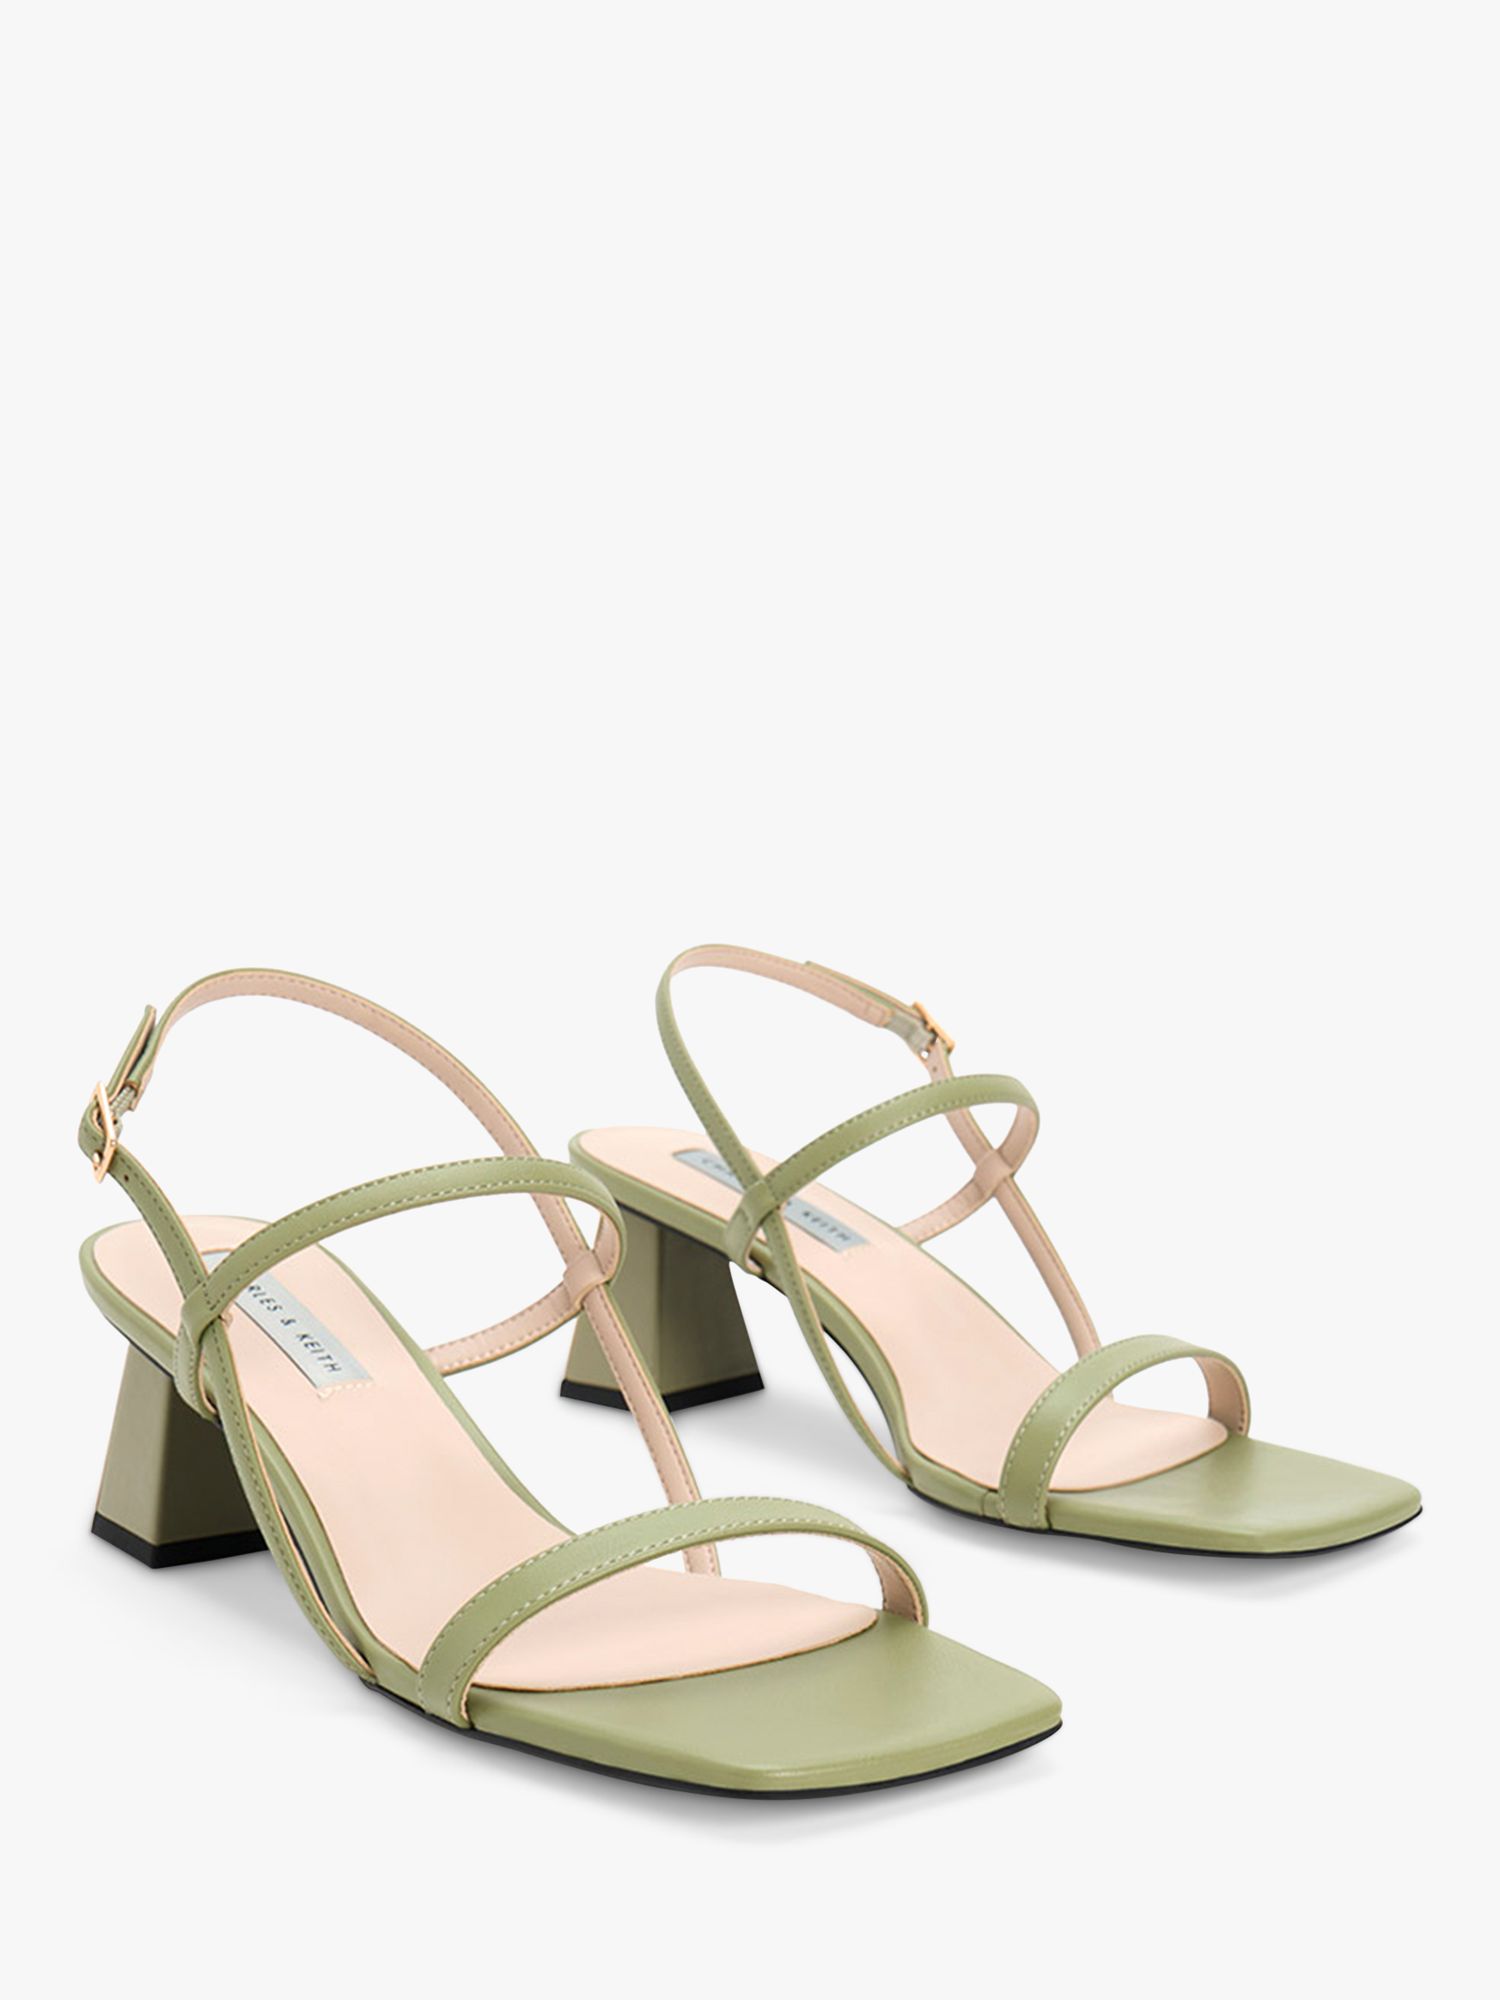 Nude Strappy Thong Sandals - CHARLES & KEITH FI